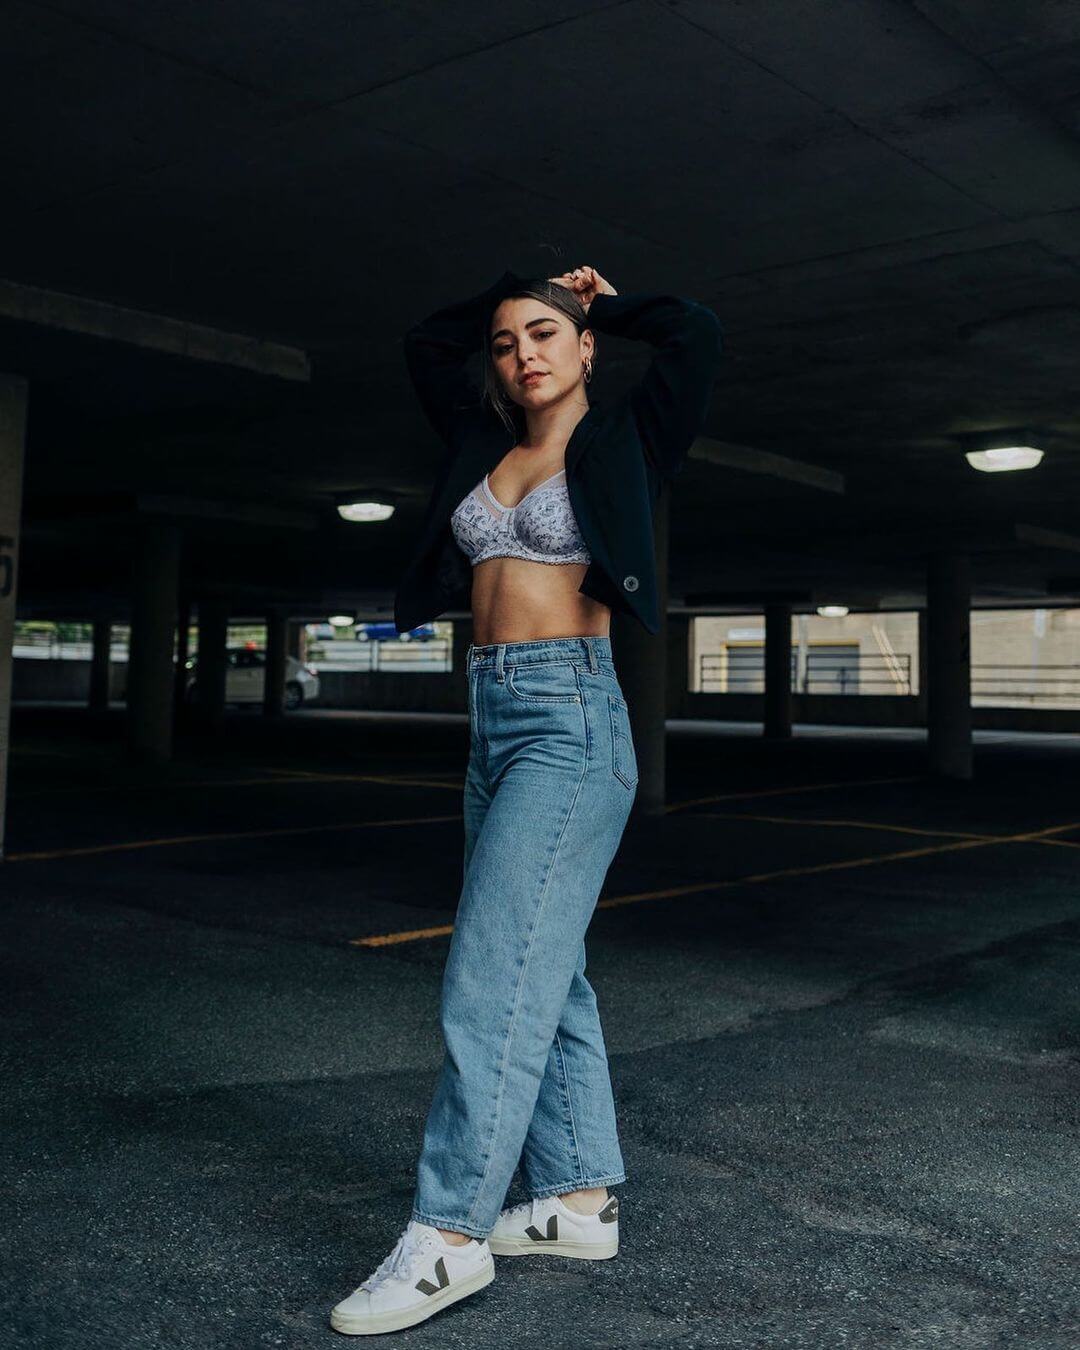 Nicole Munoz's Hot Denim Look - A Perfect Fusion of Grace, Glamour, and Sunkissed Glow